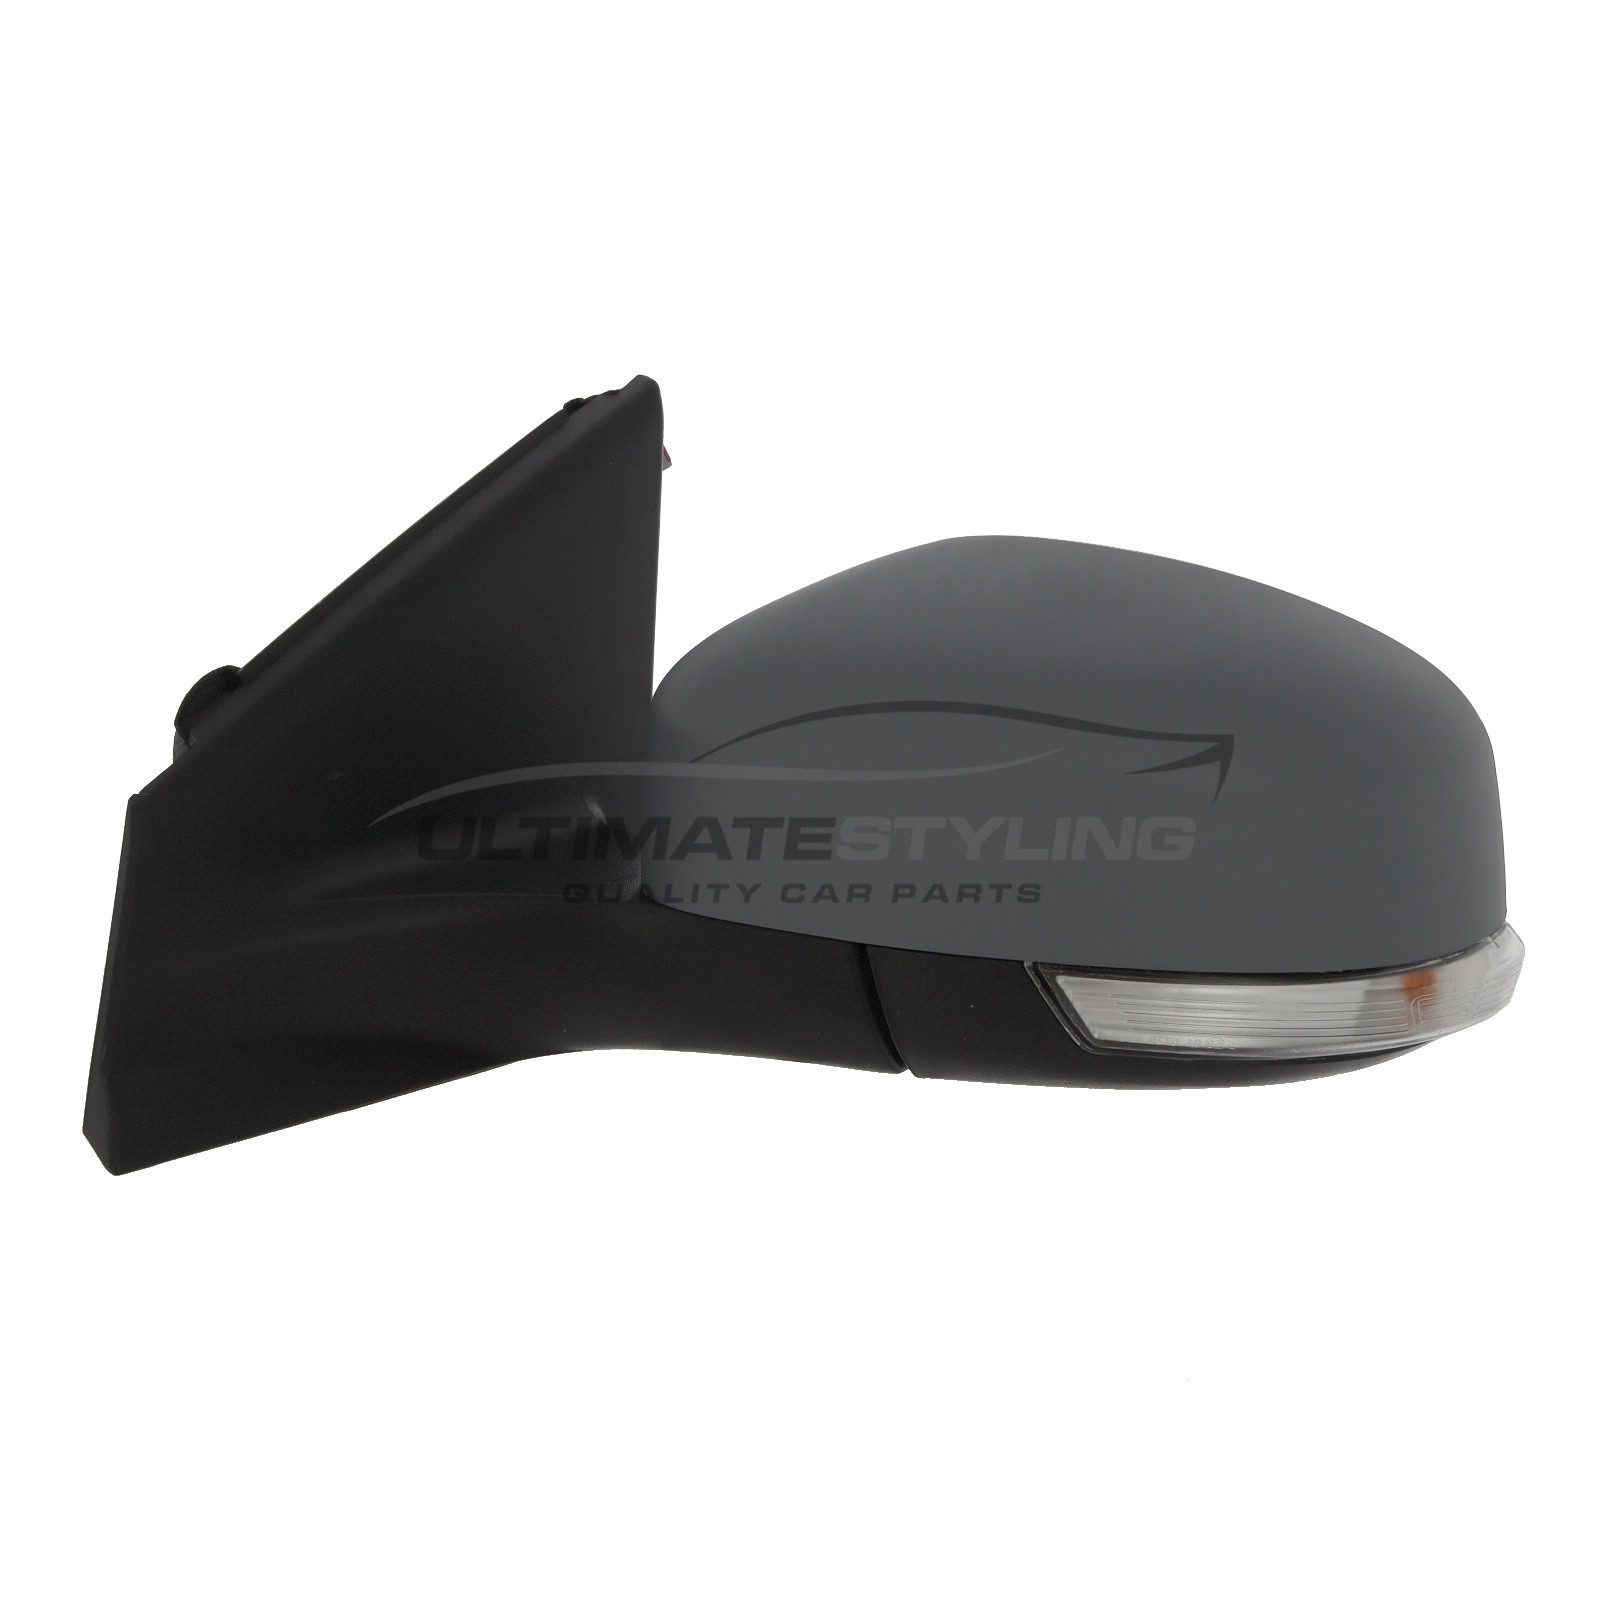 Ford Mondeo Wing Mirror / Door Mirror - Passenger Side (LH) - Electric adjustment - Heated Glass - Power Folding - Indicator - Puddle Light - Primed